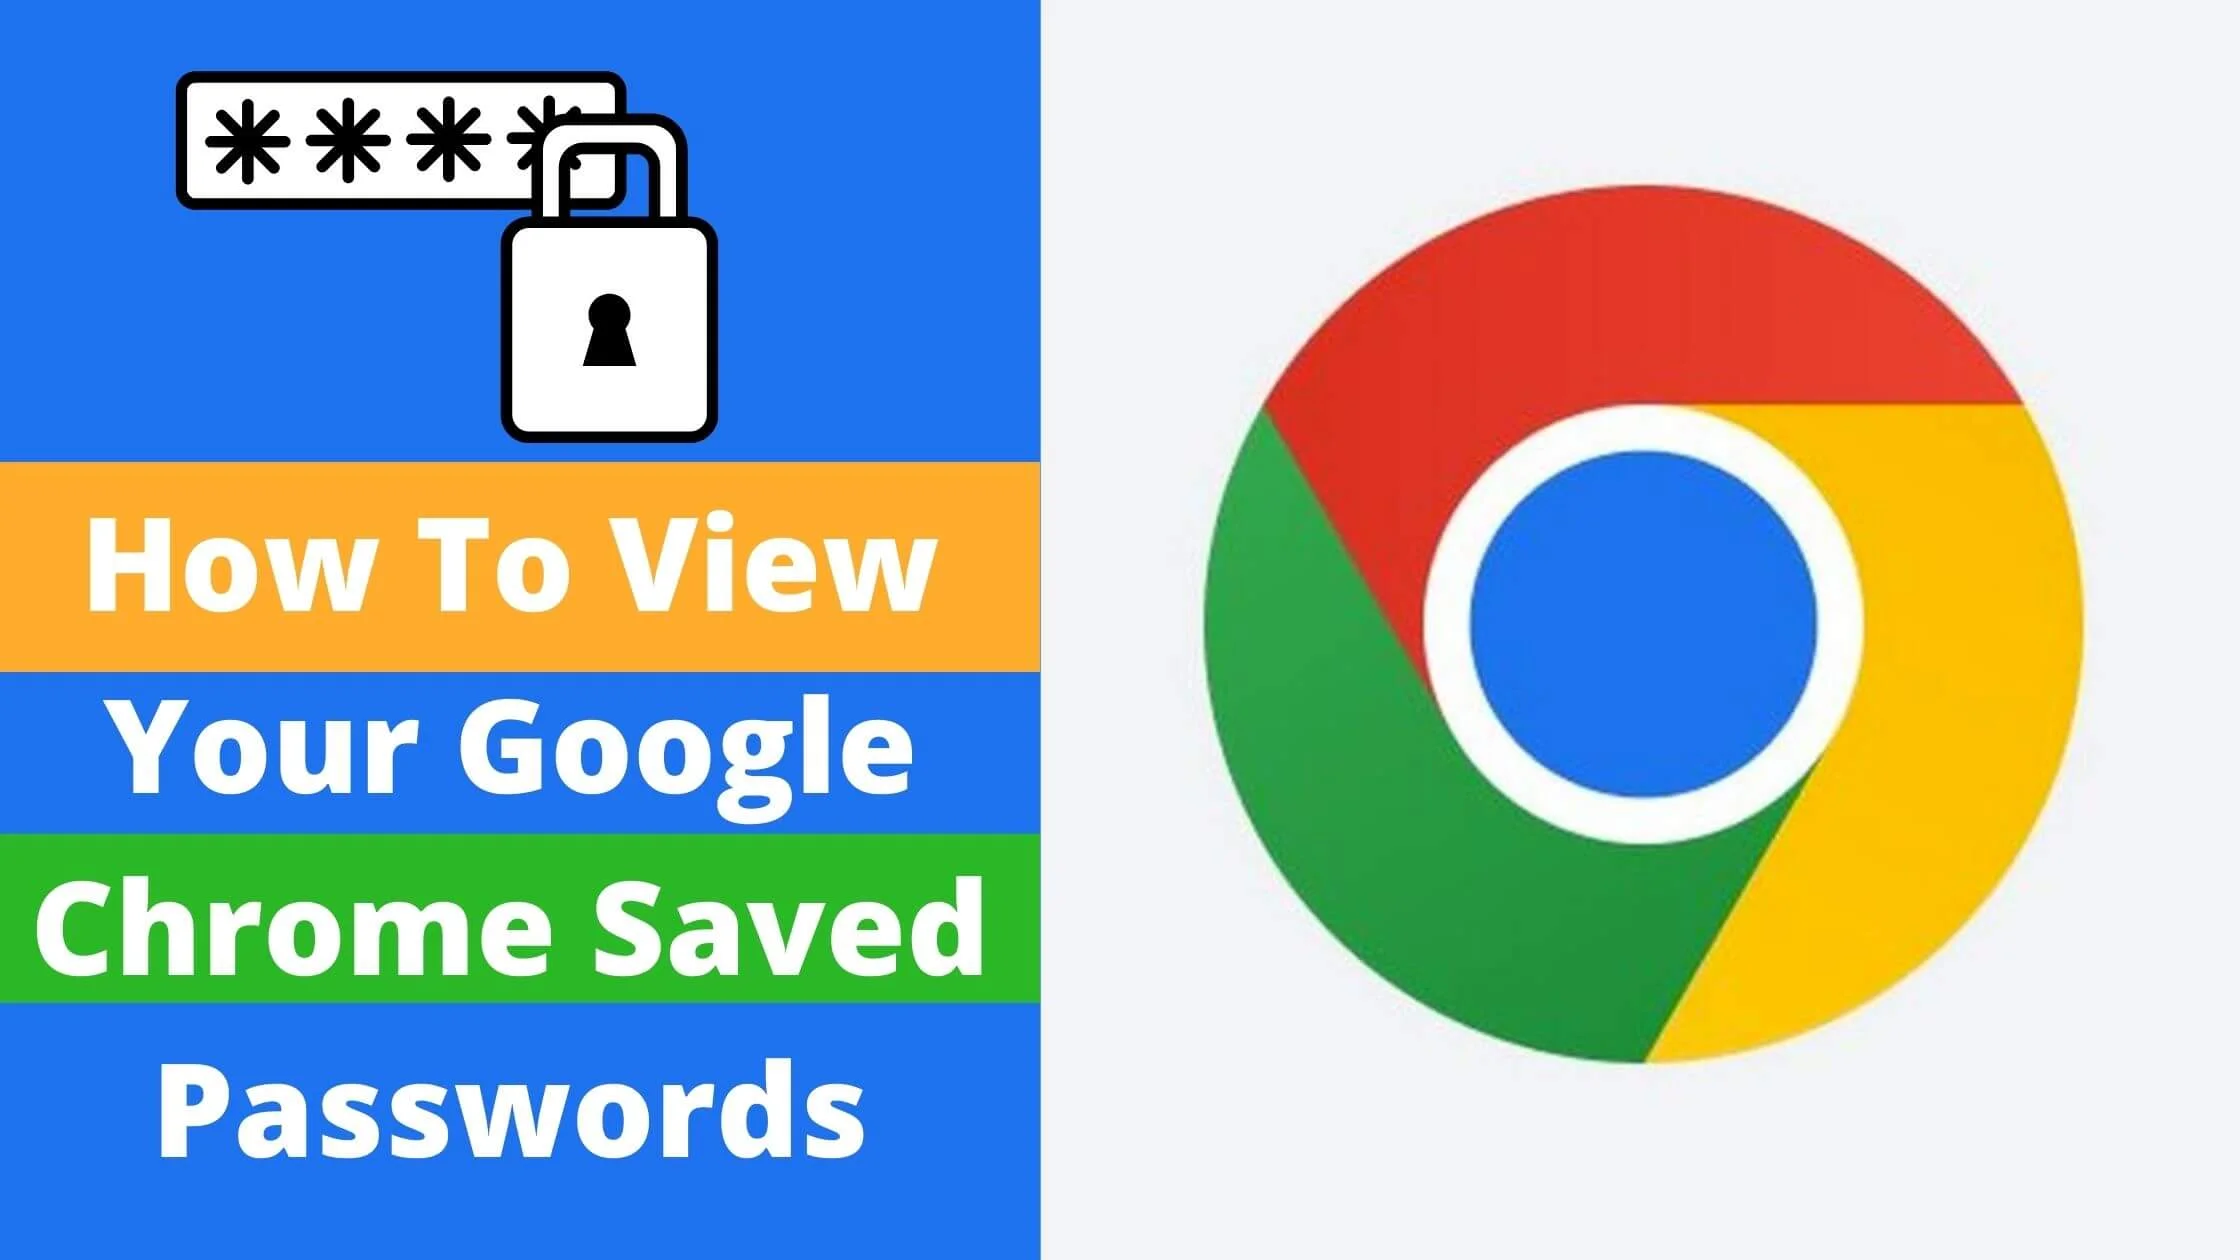 How To View Your Google Chrome Saved Passwords